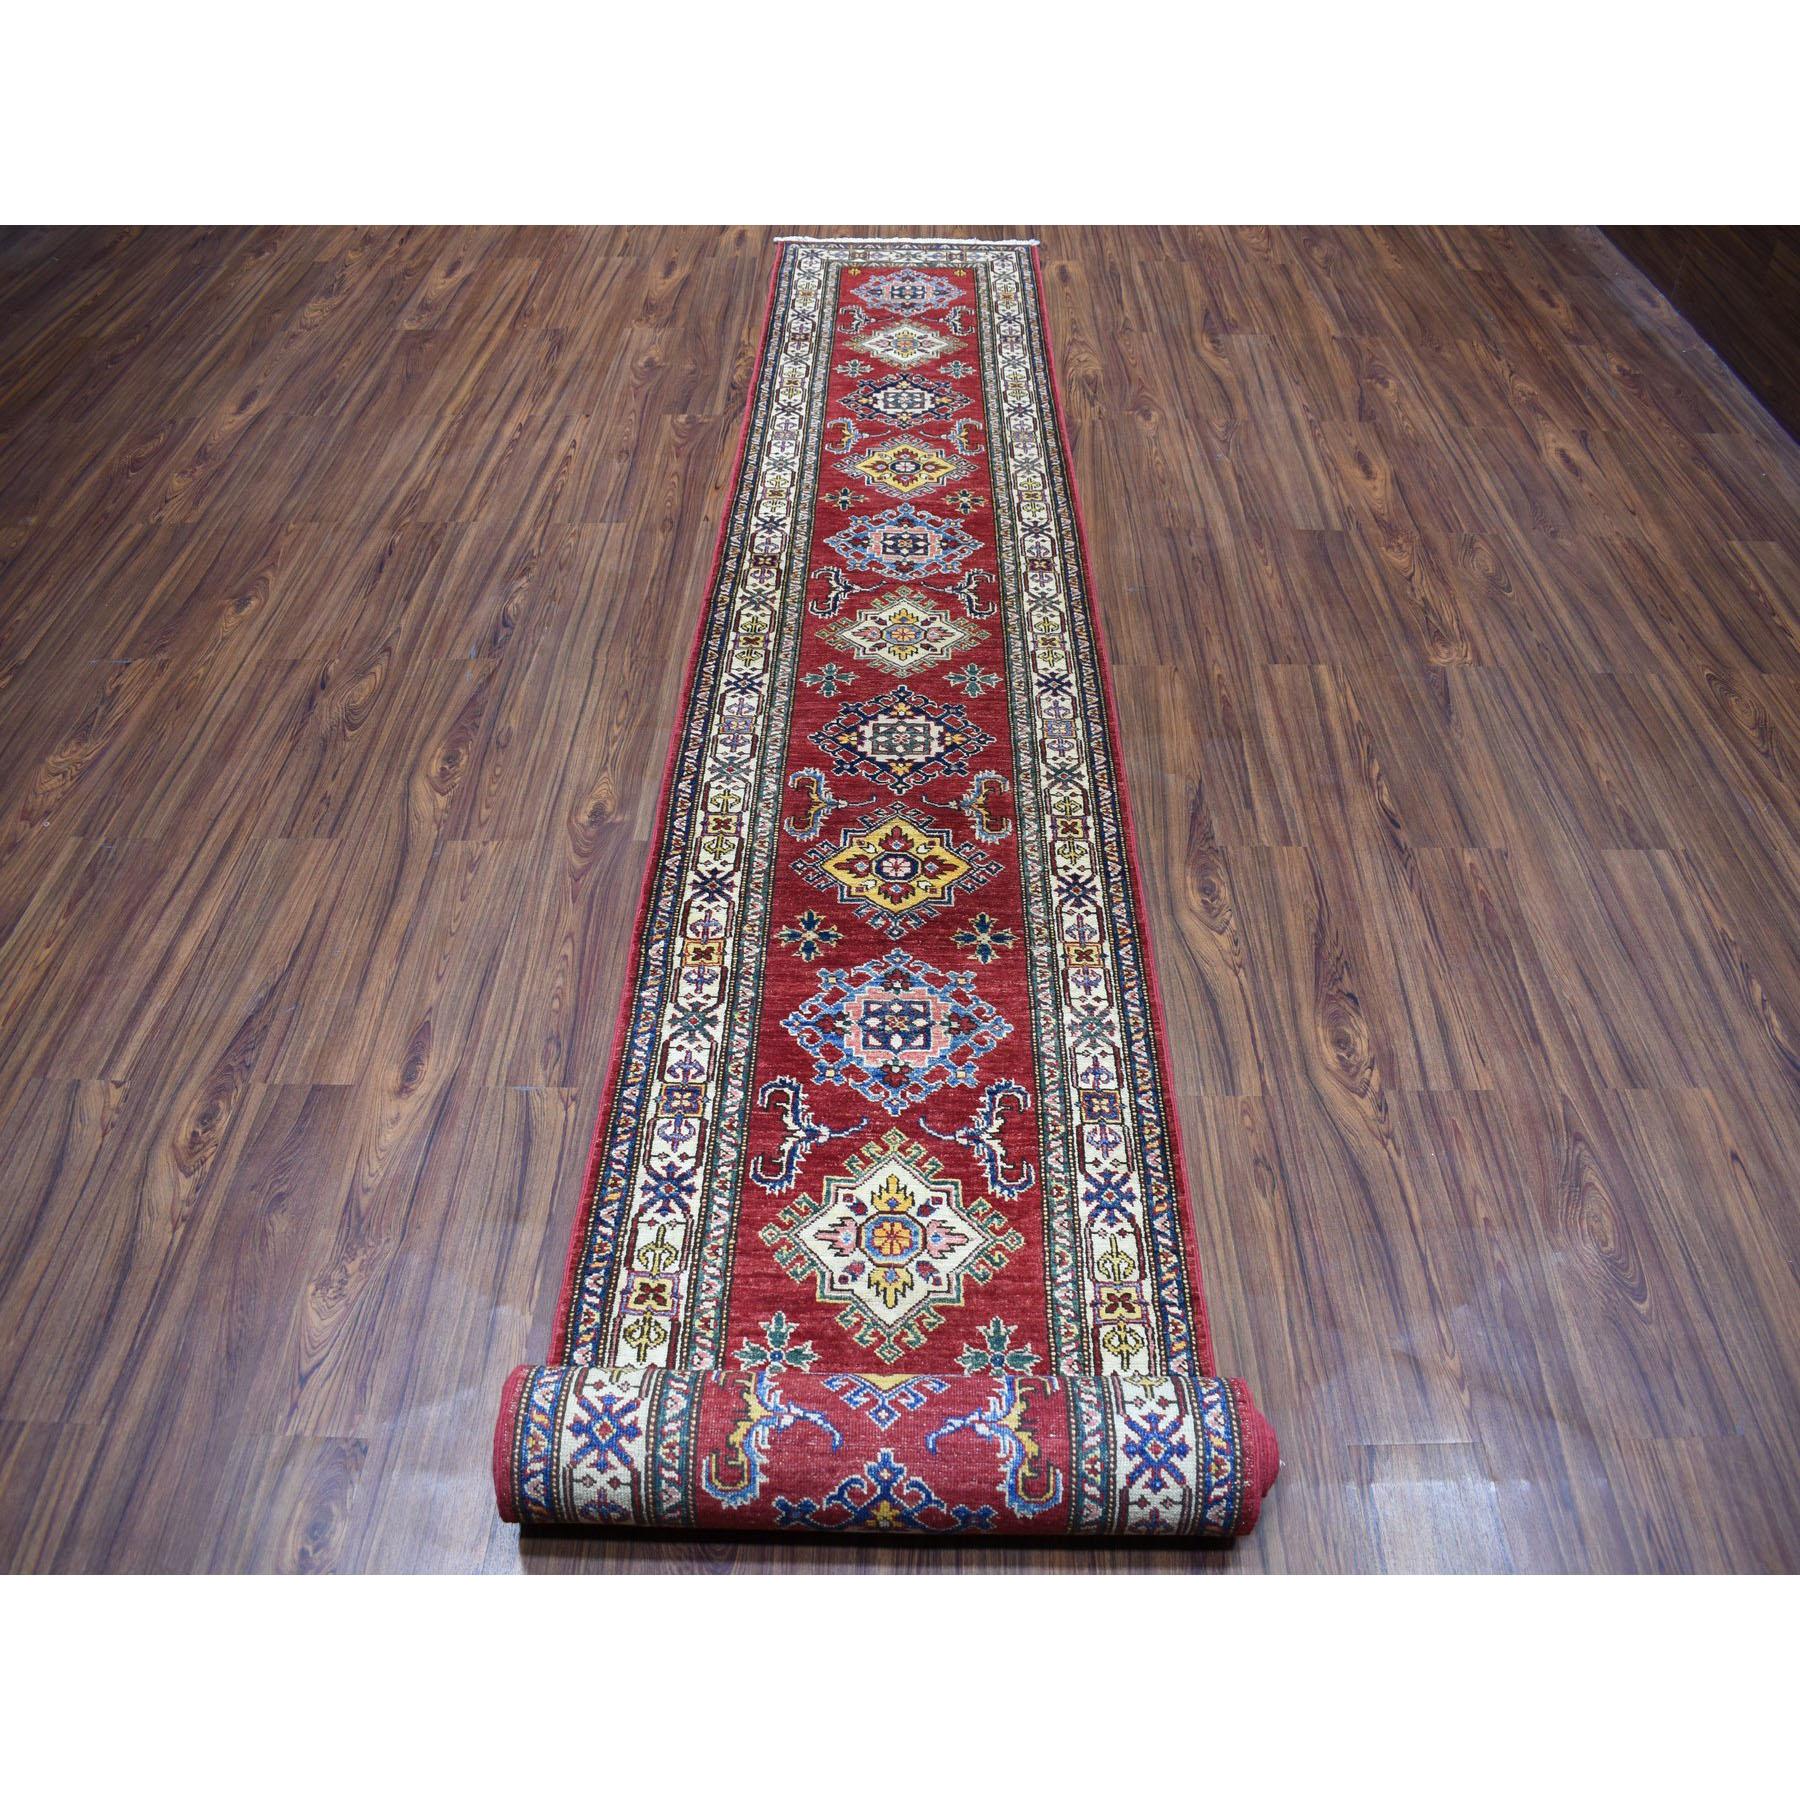 This is a truly genuine one-of-a-kind red super Kazak geometric design extra-large runner pure wool hand knotted Oriental rug. It has been knotted for months and months in the centuries-old Persian weaving craftsmanship techniques by expert